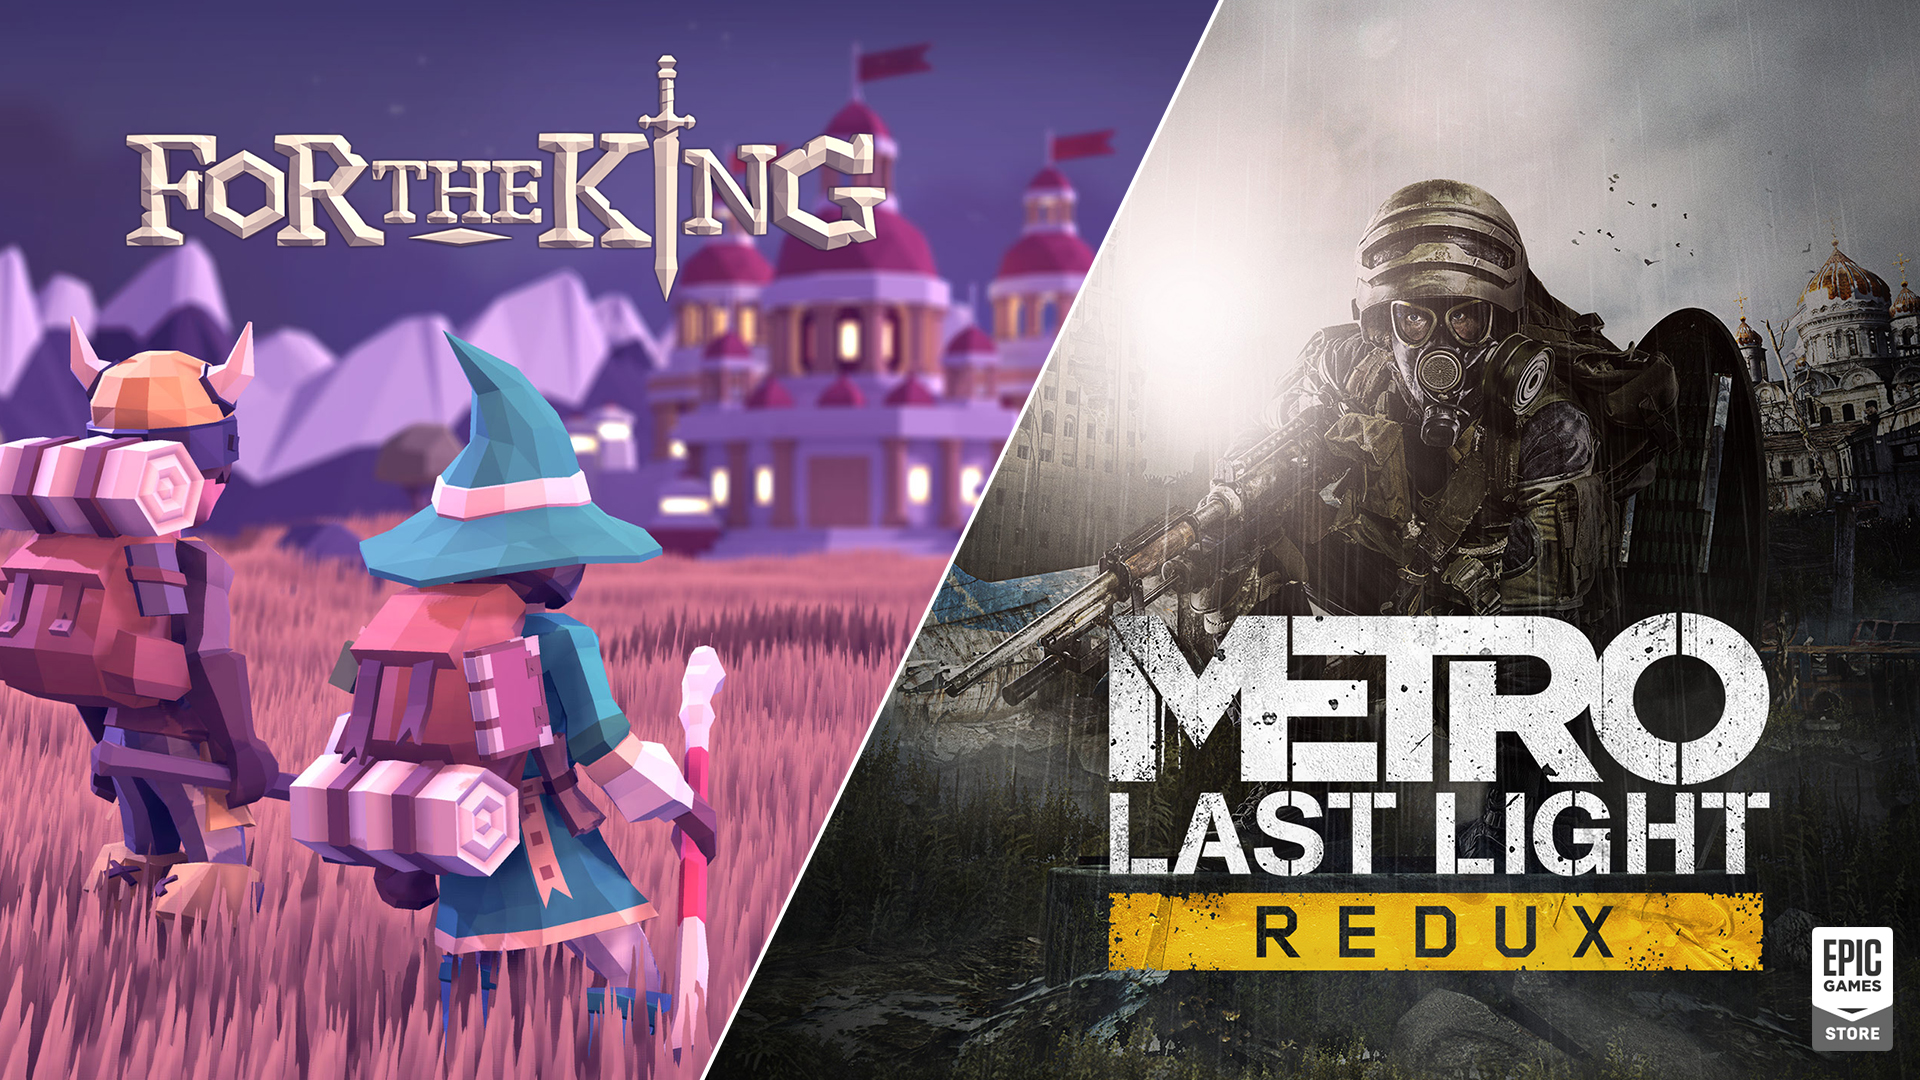 Epic Games Store Free This Week Turn Based Adventure And Survival Horror Await You Grab For The King And Metro Last Light Redux For Free On The Epic Games